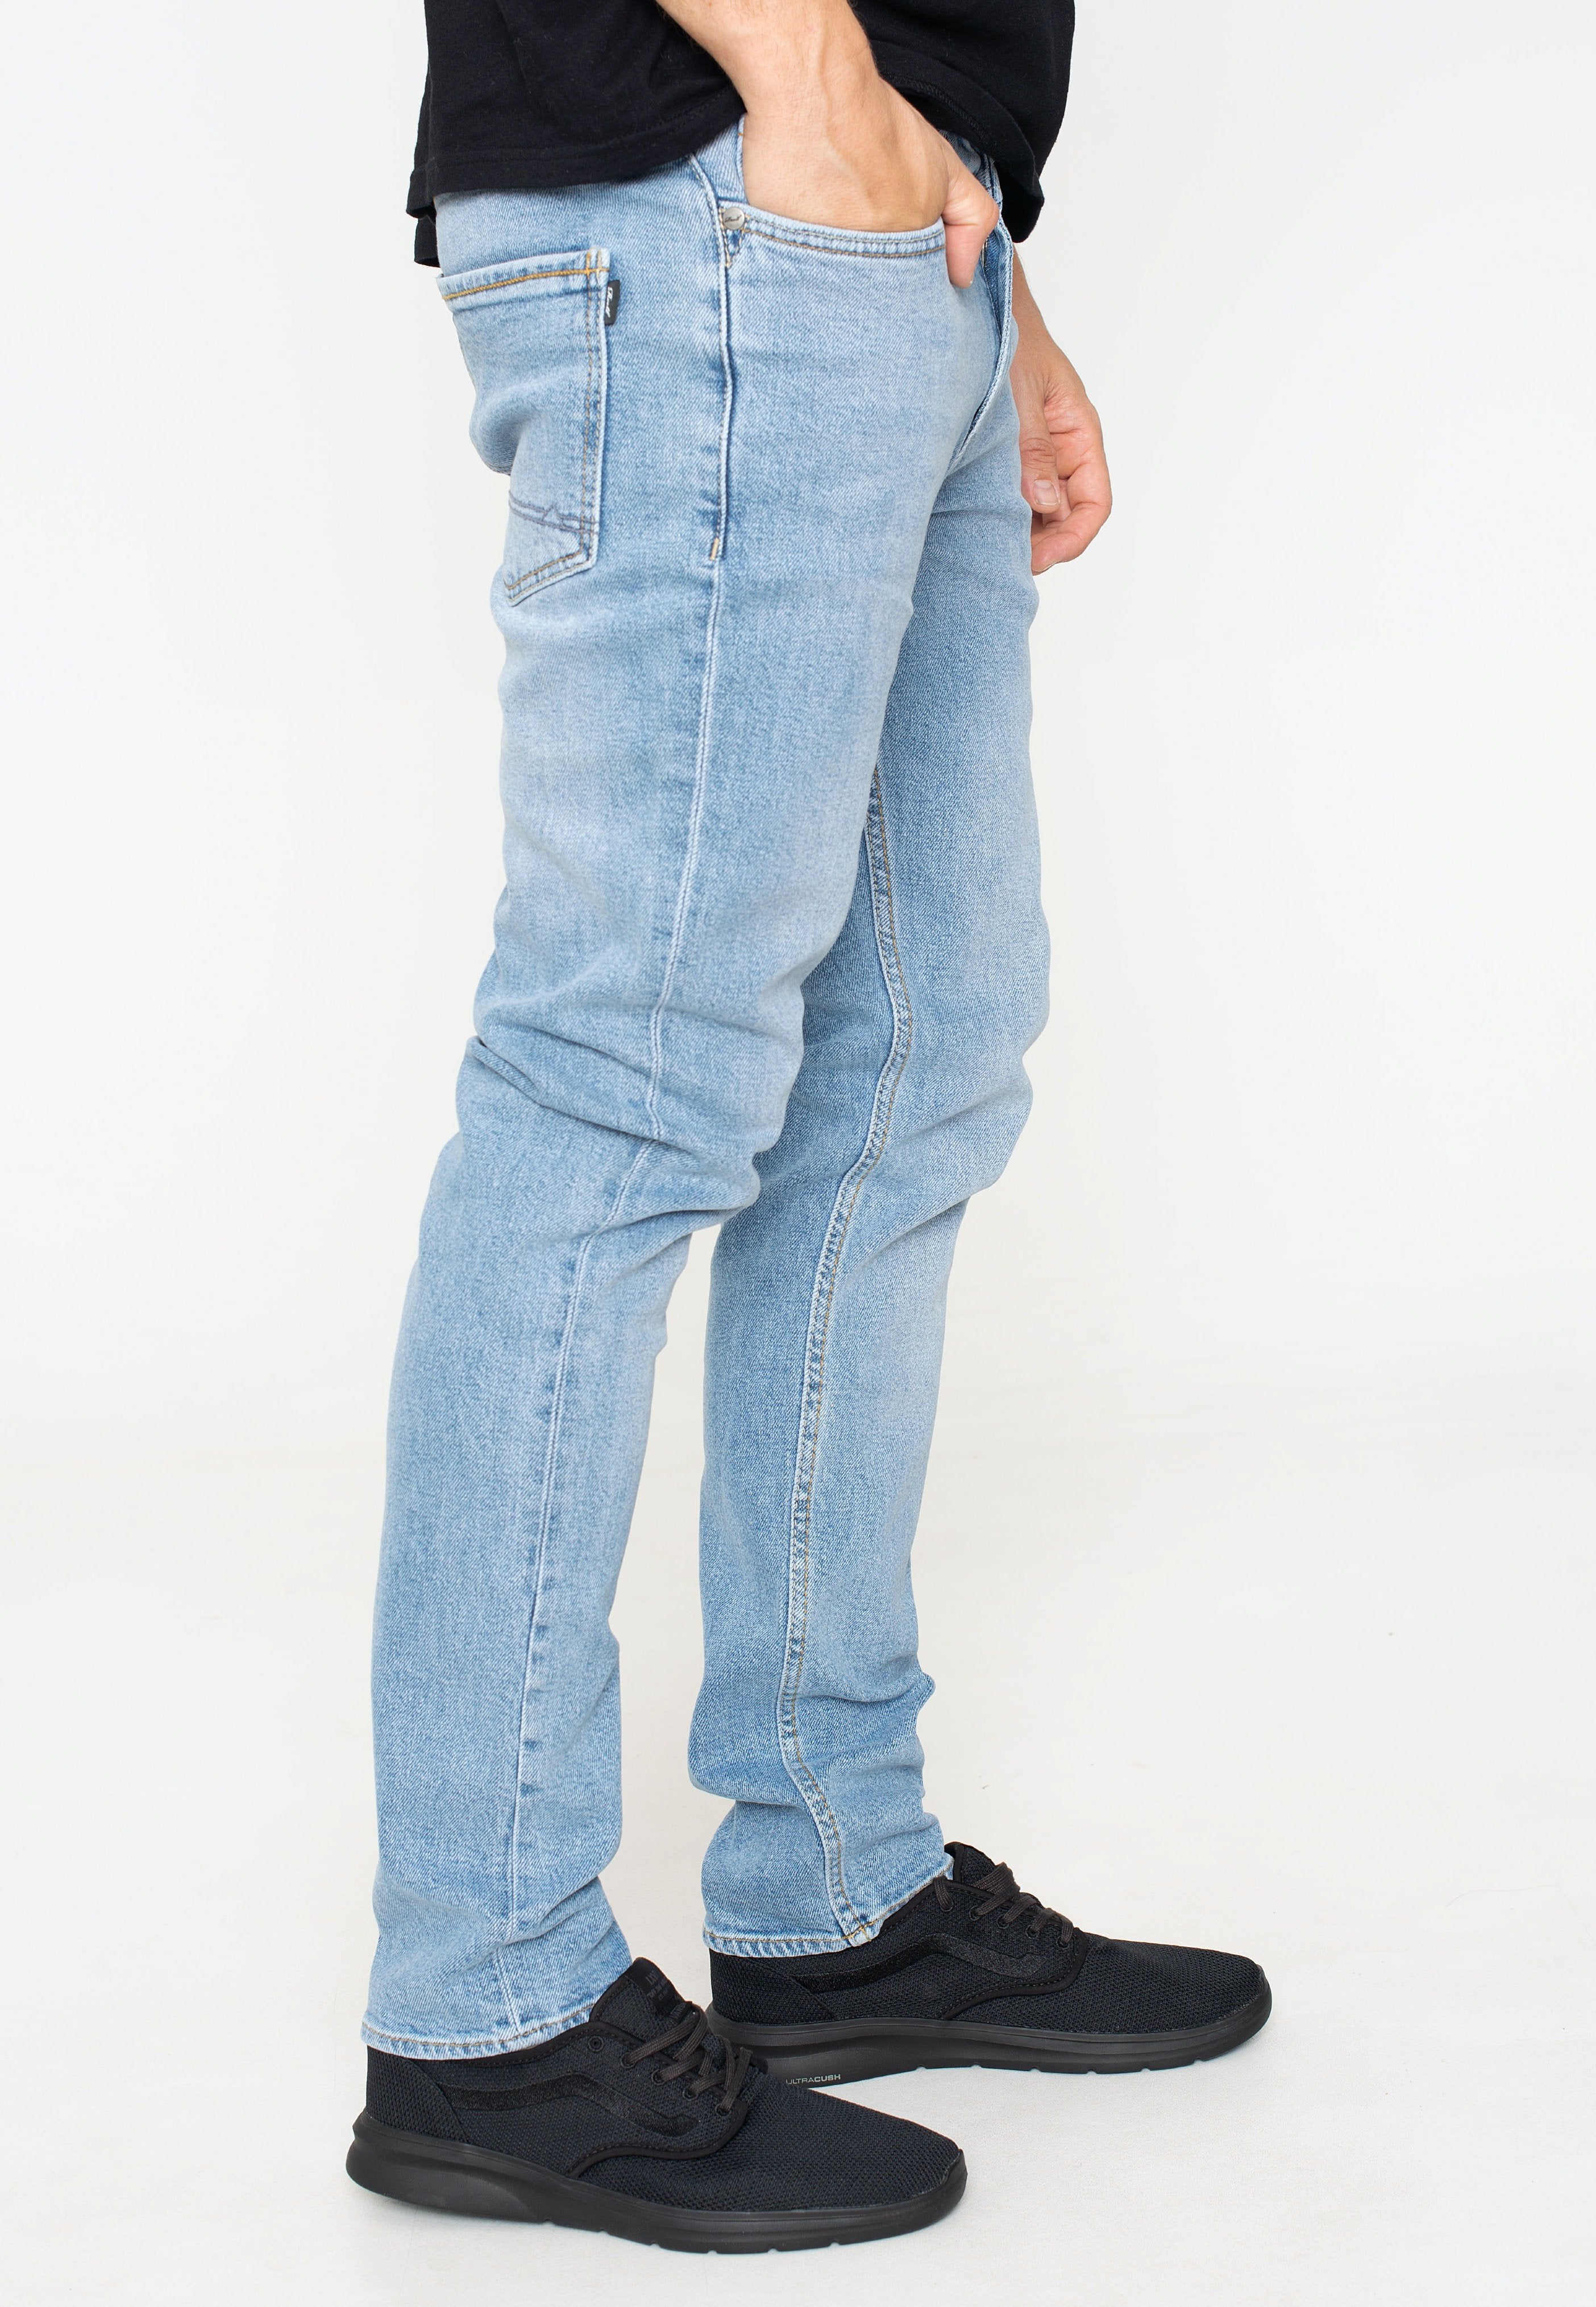 REELL - Spider Light Blue Stone - Jeans